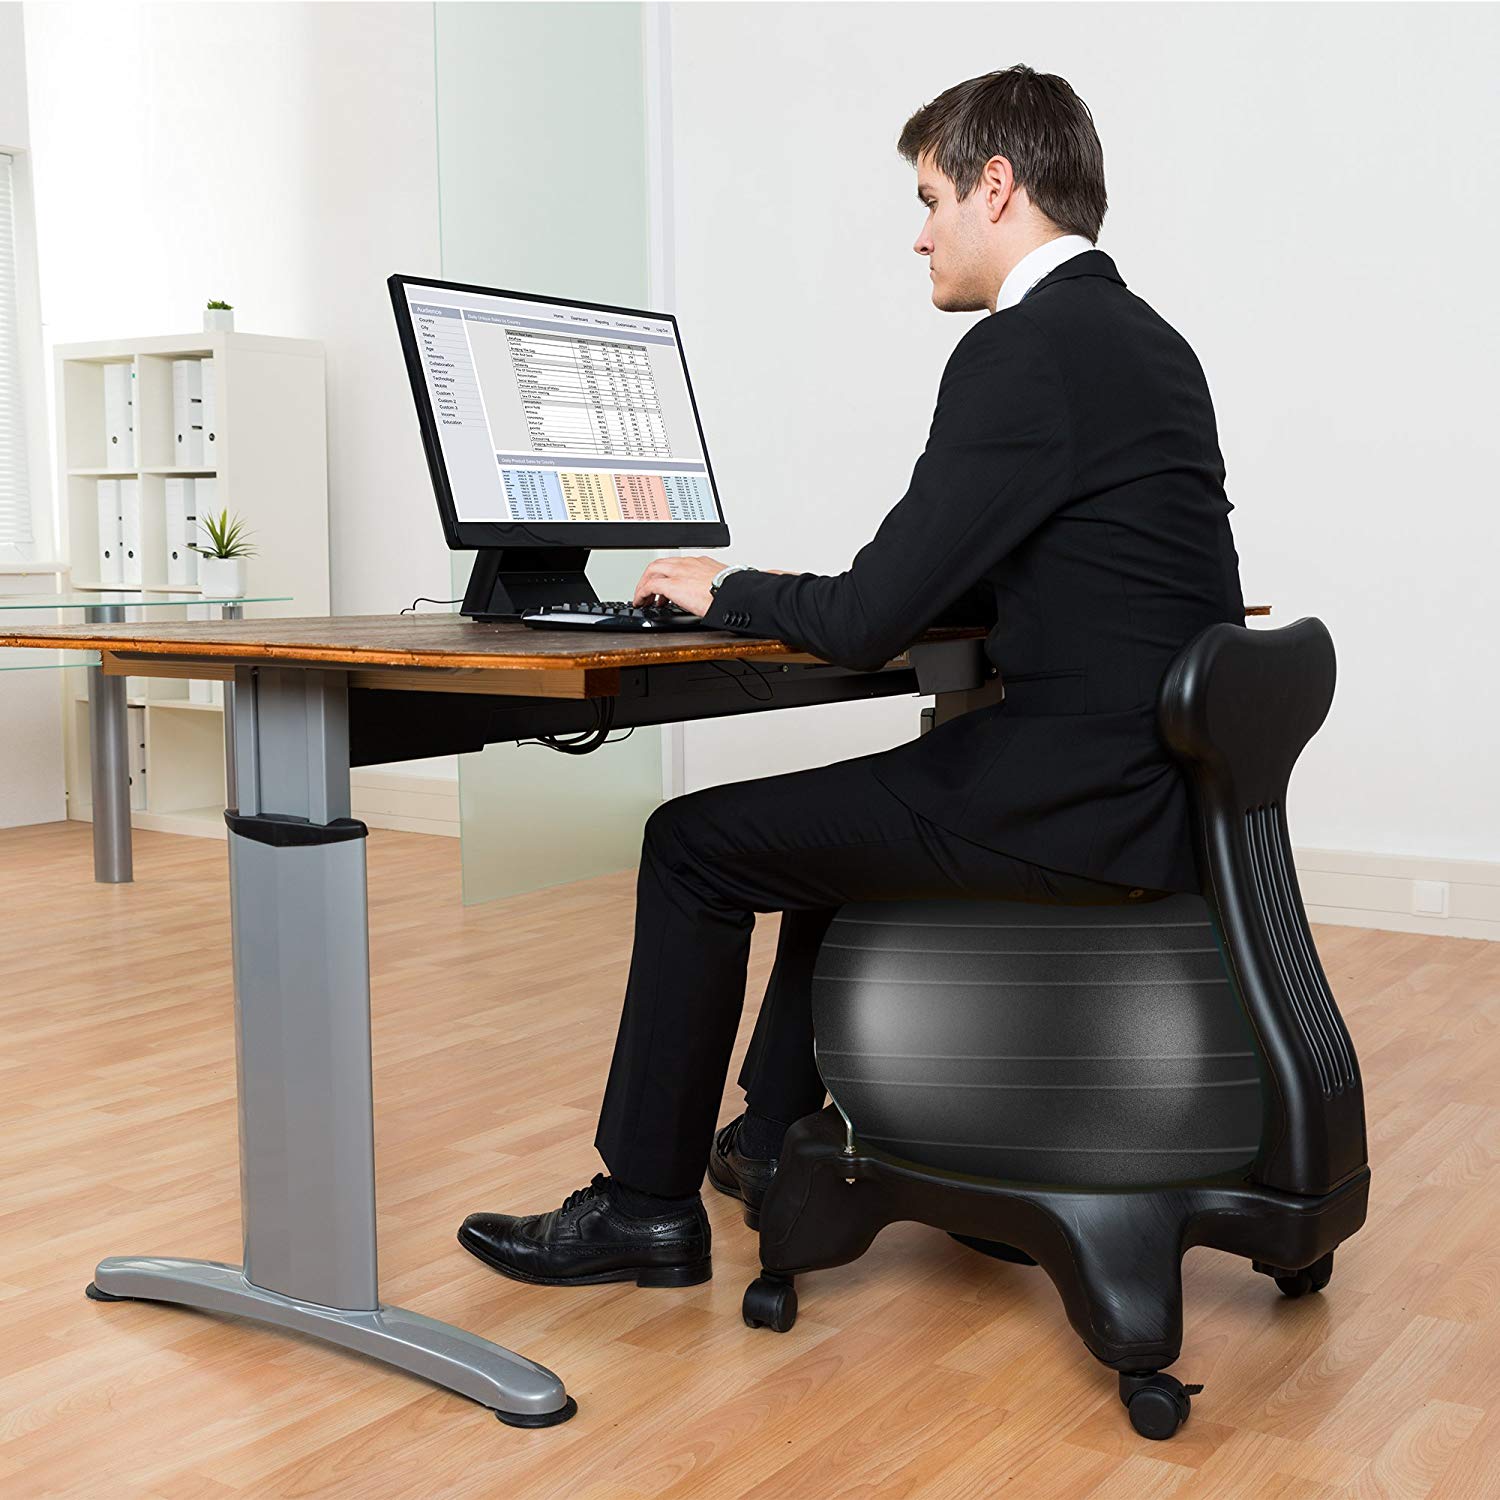 Top 10 Best Ball Chairs in 2022 Reviews | Buyer's Guide